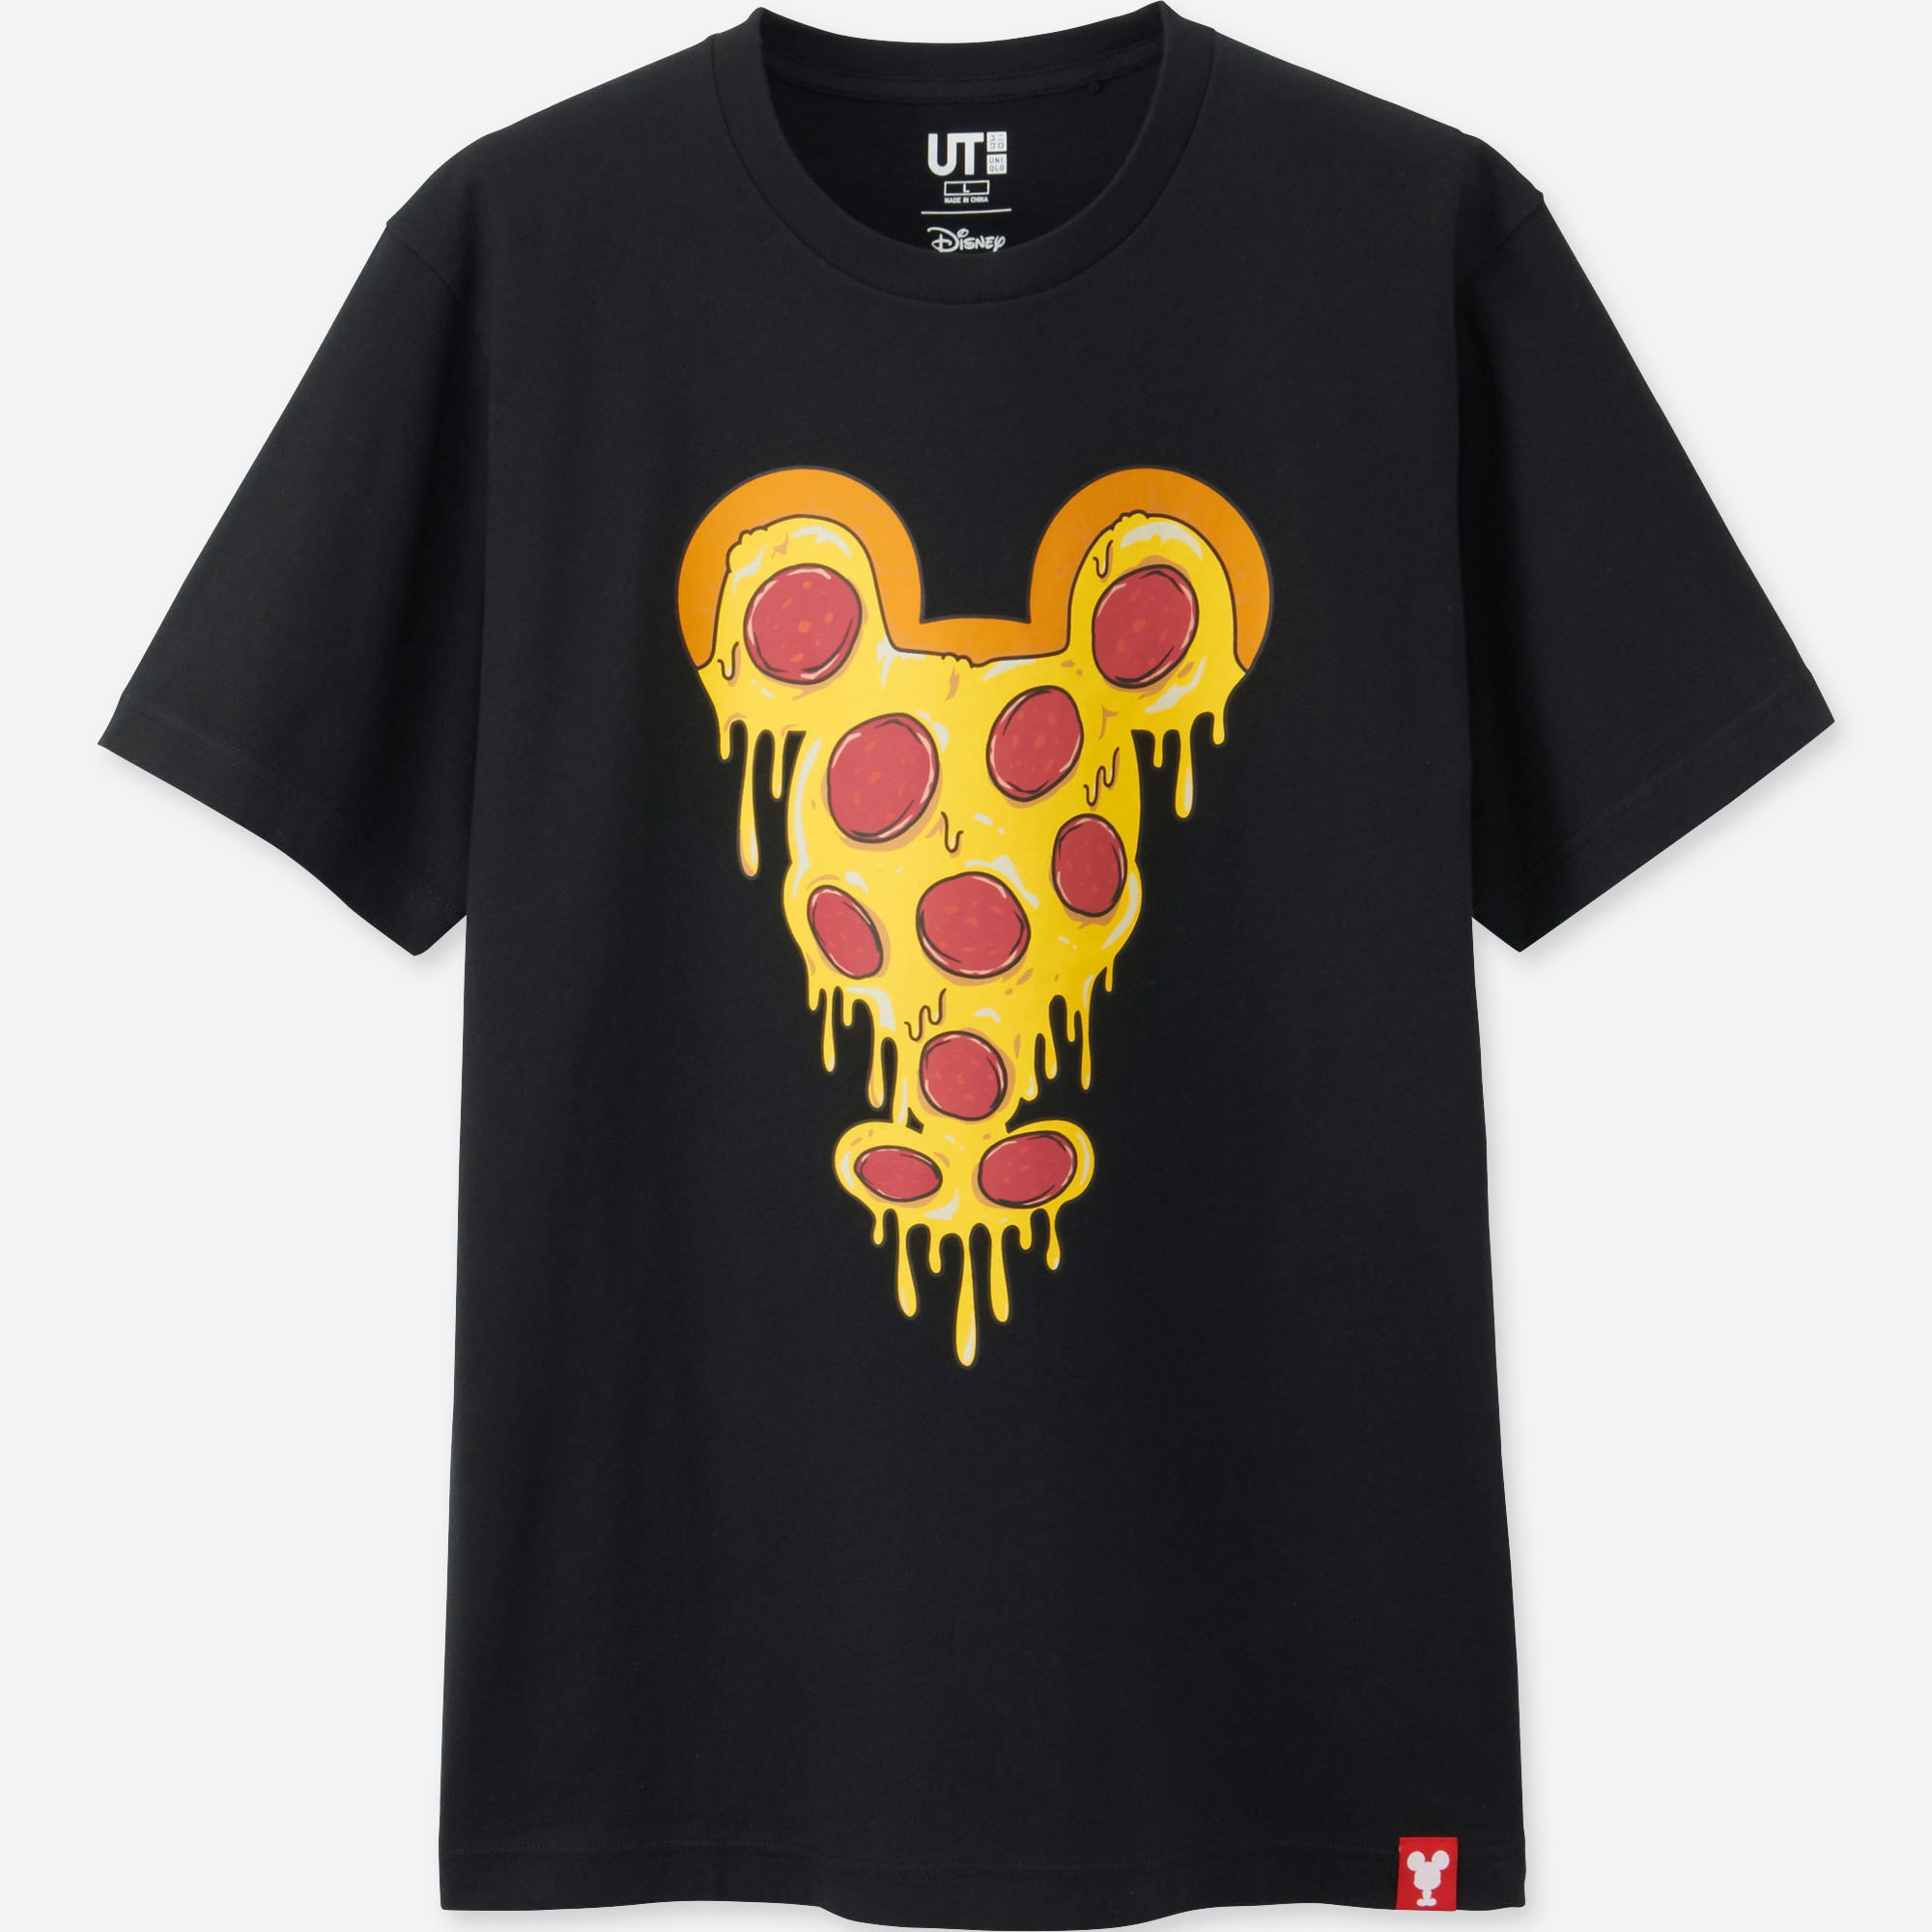 mickey mouse pizza shirt